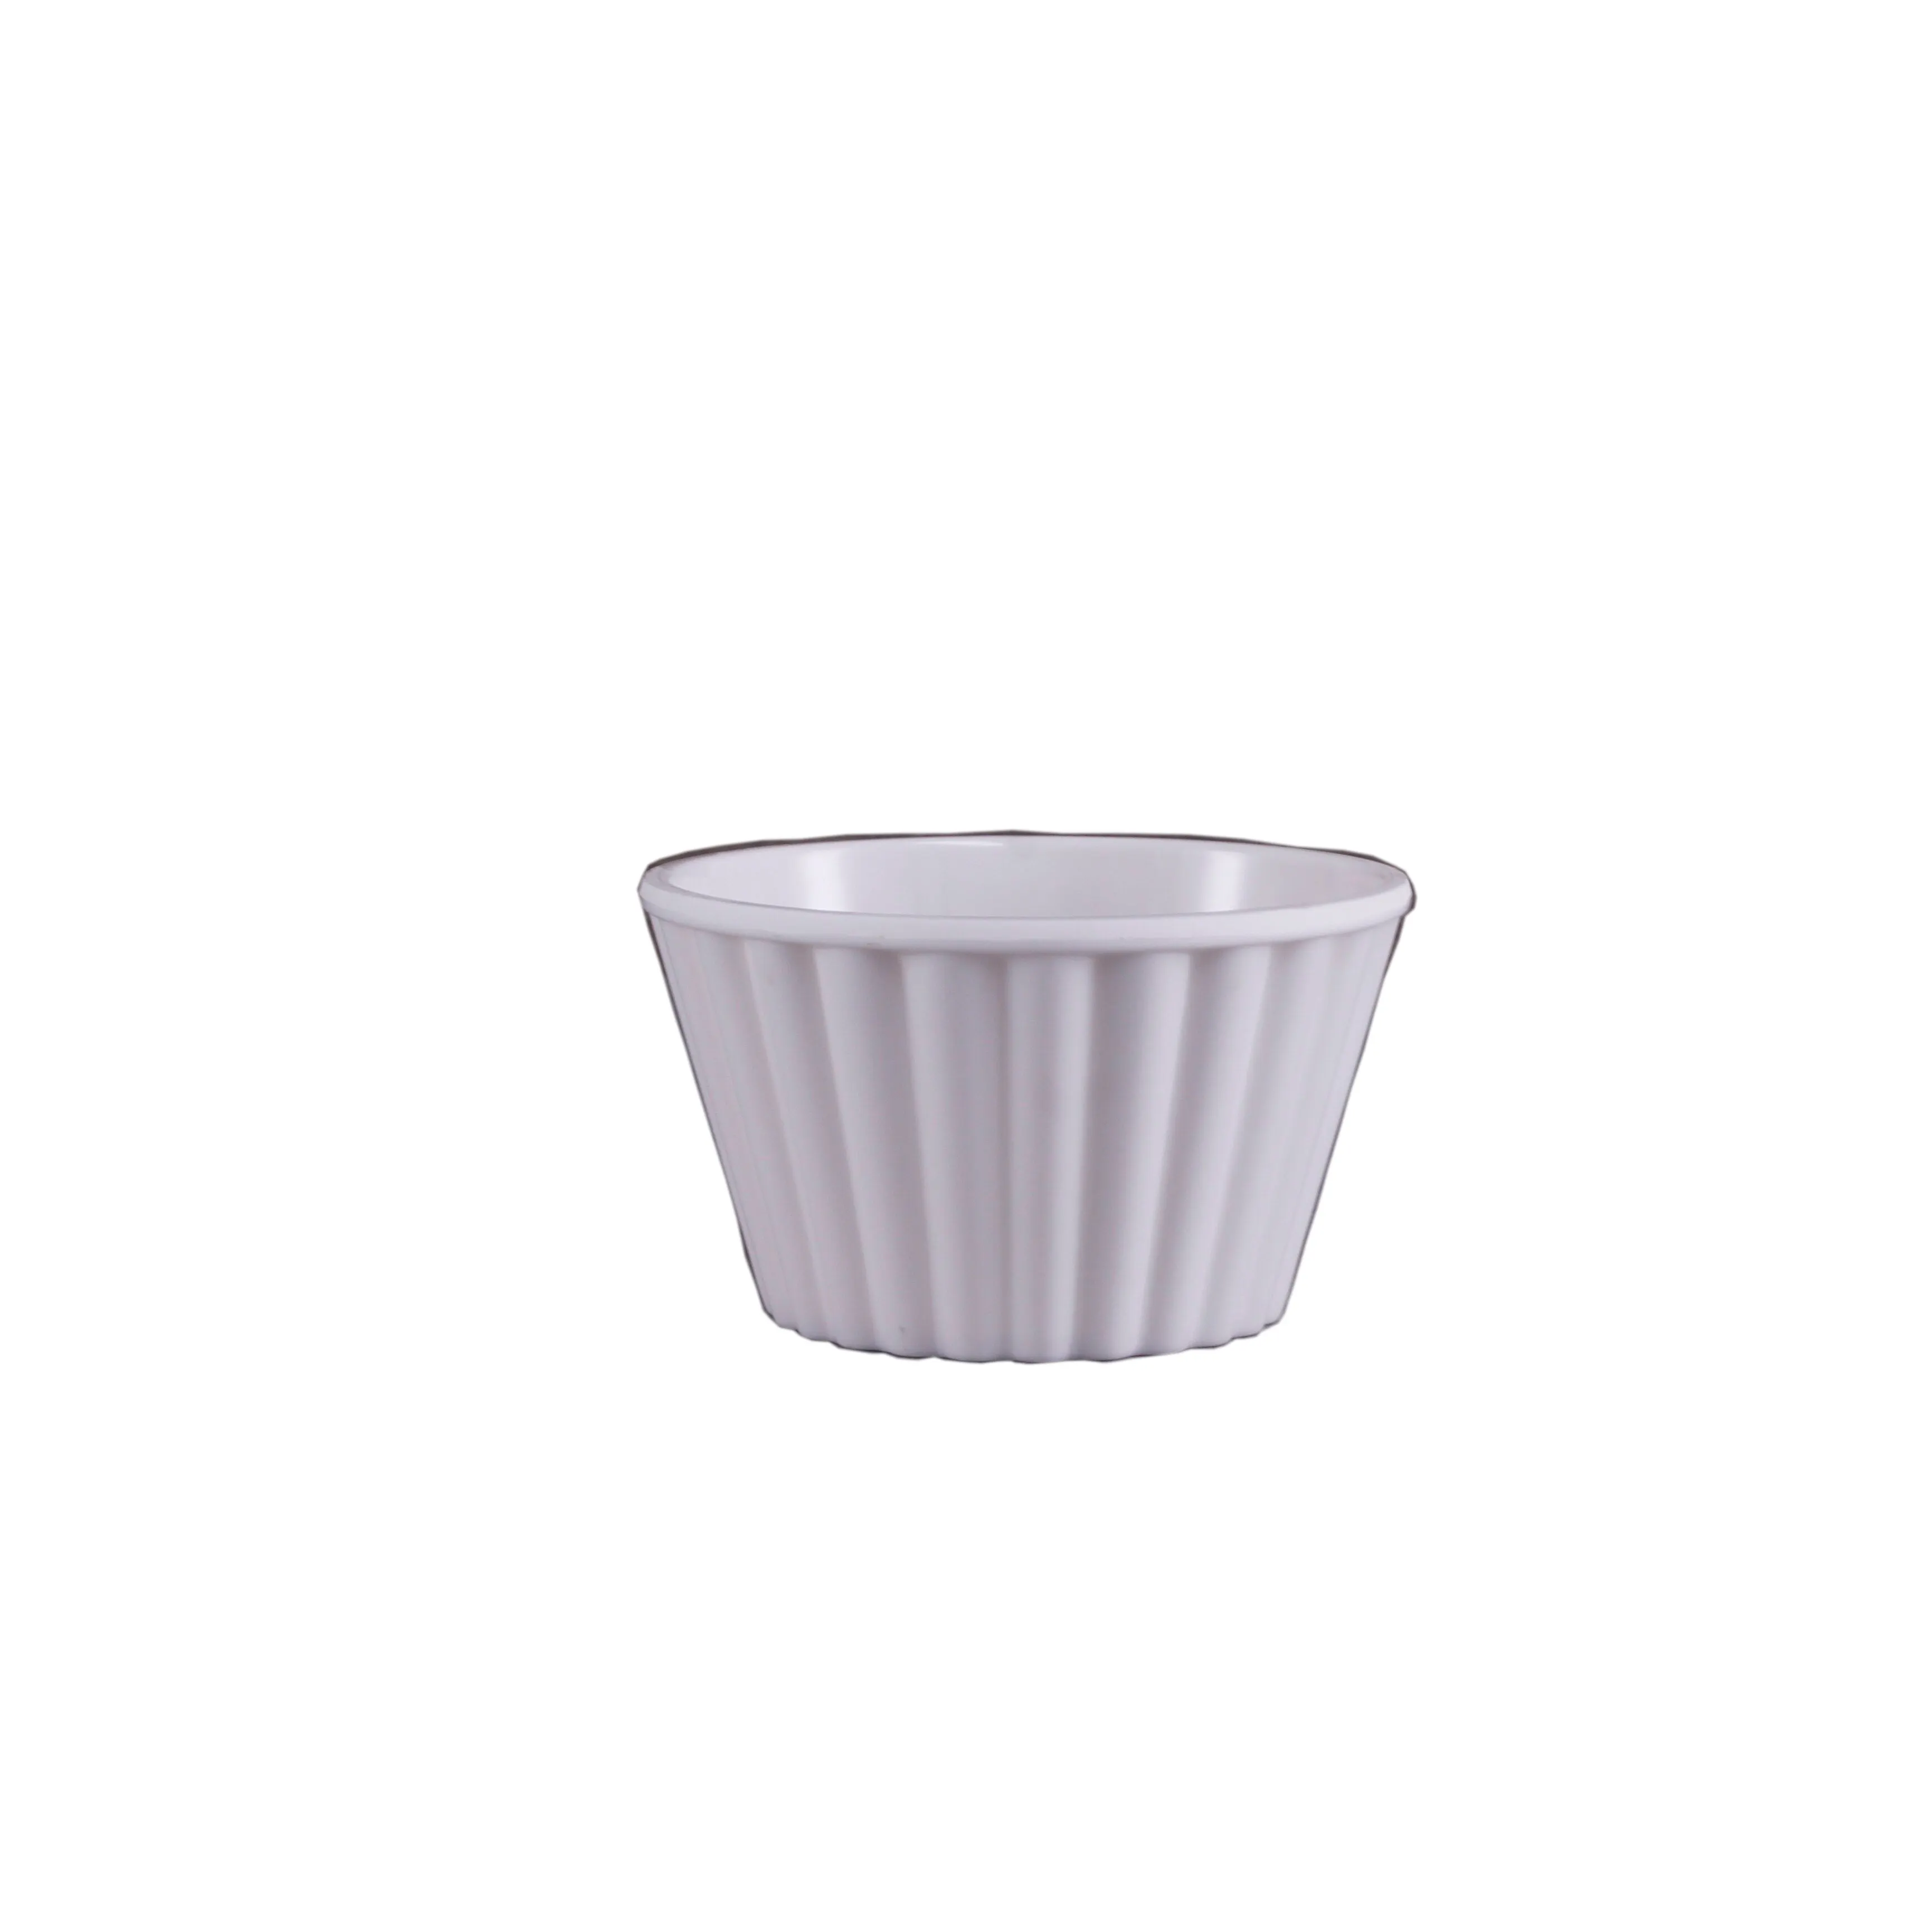 Wedding Decoration Unbreakable Cake Cup Round Snack Bowl 4 Inch Melamine Sauce Cup Dipping Bowl Melamine Cake Bowl